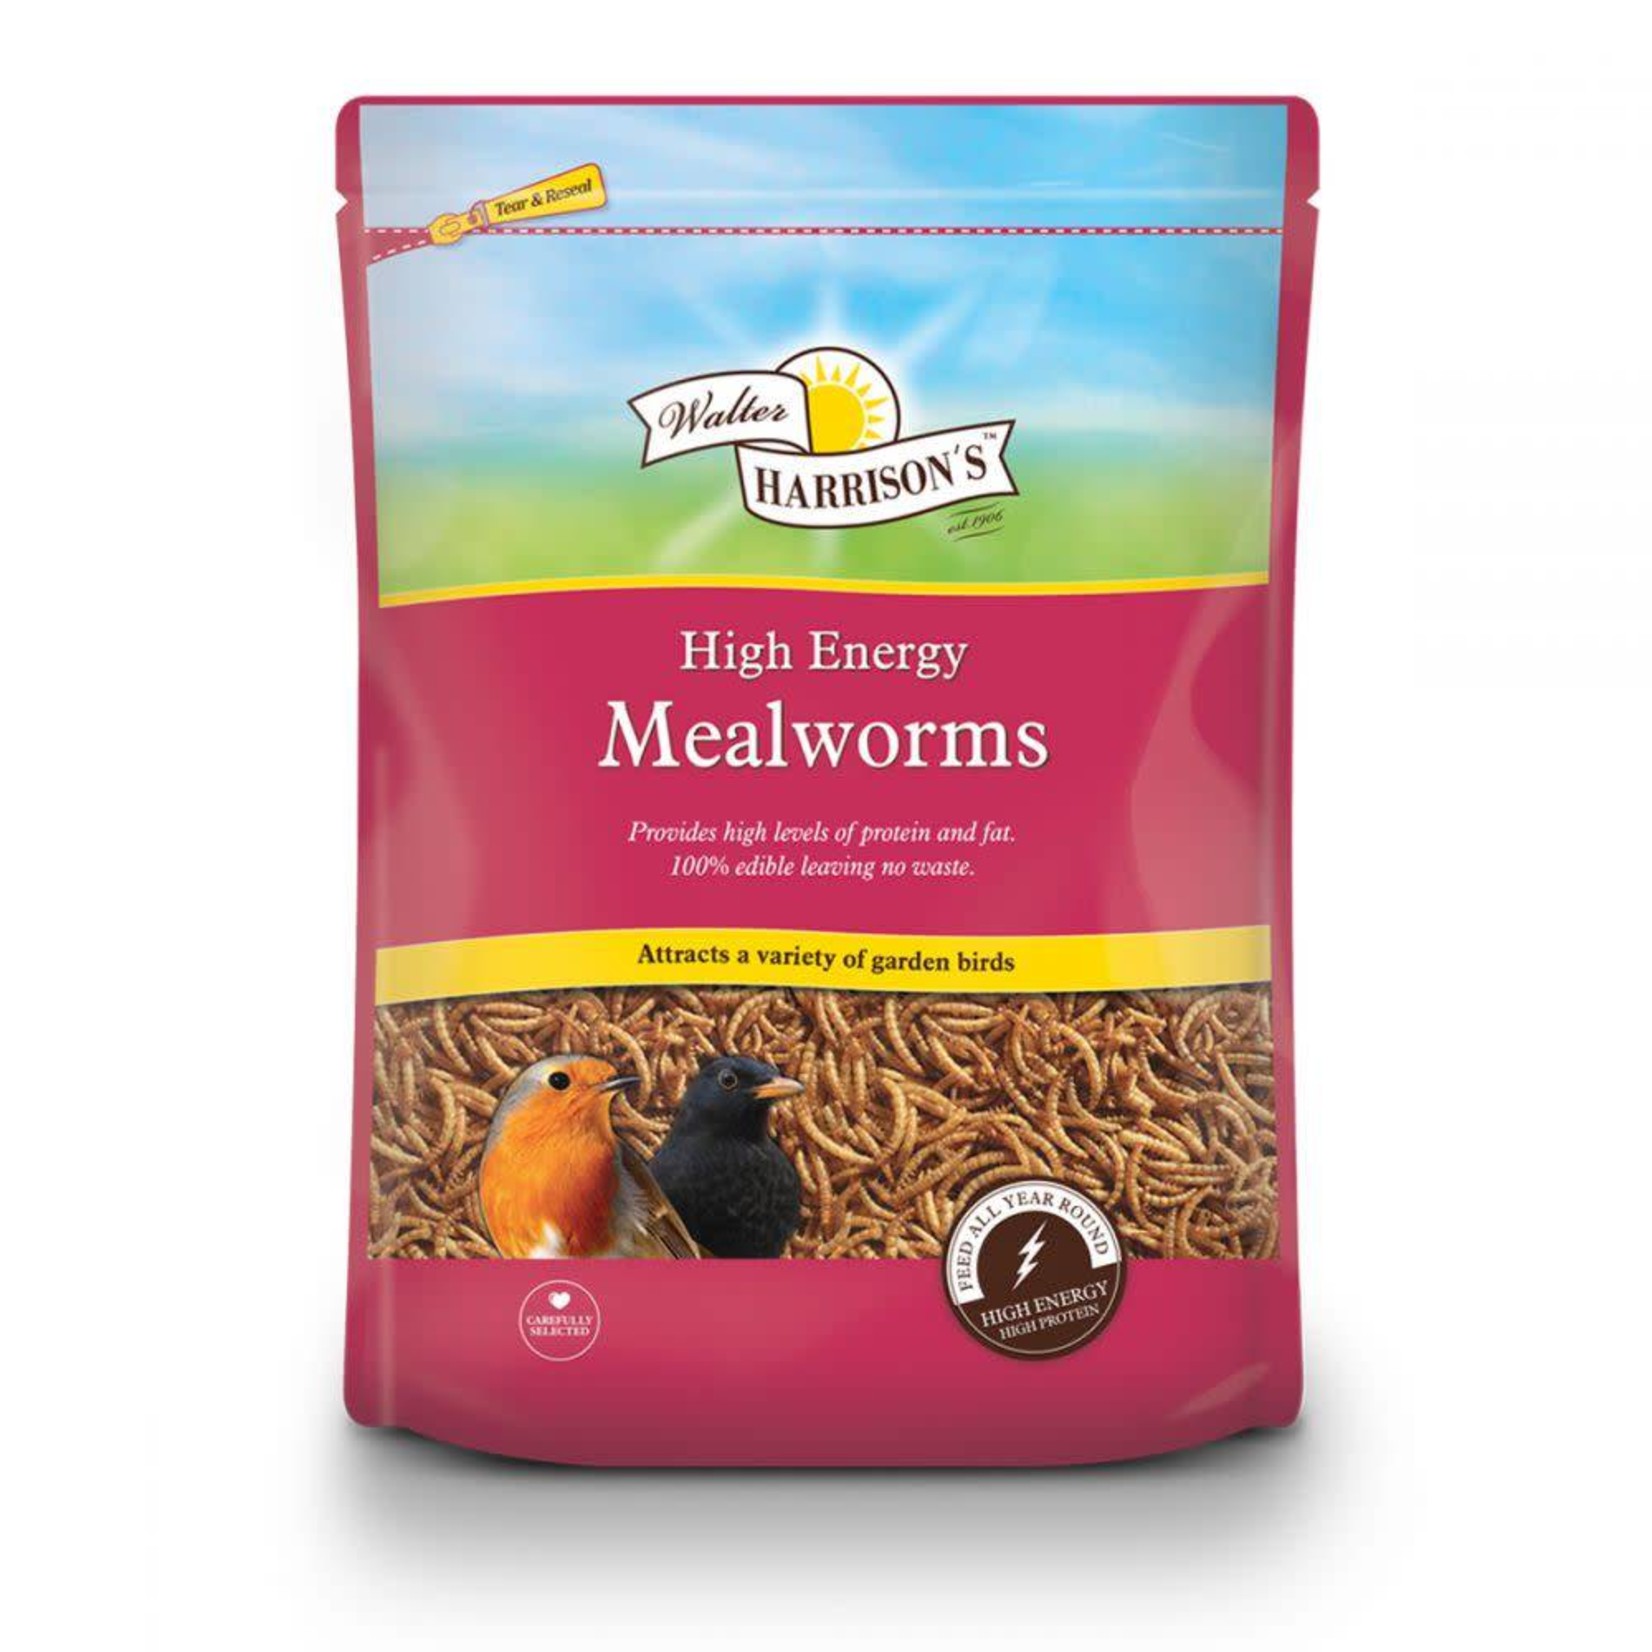 Harrisons High Energy Mealworm Pouch for Wild Birds